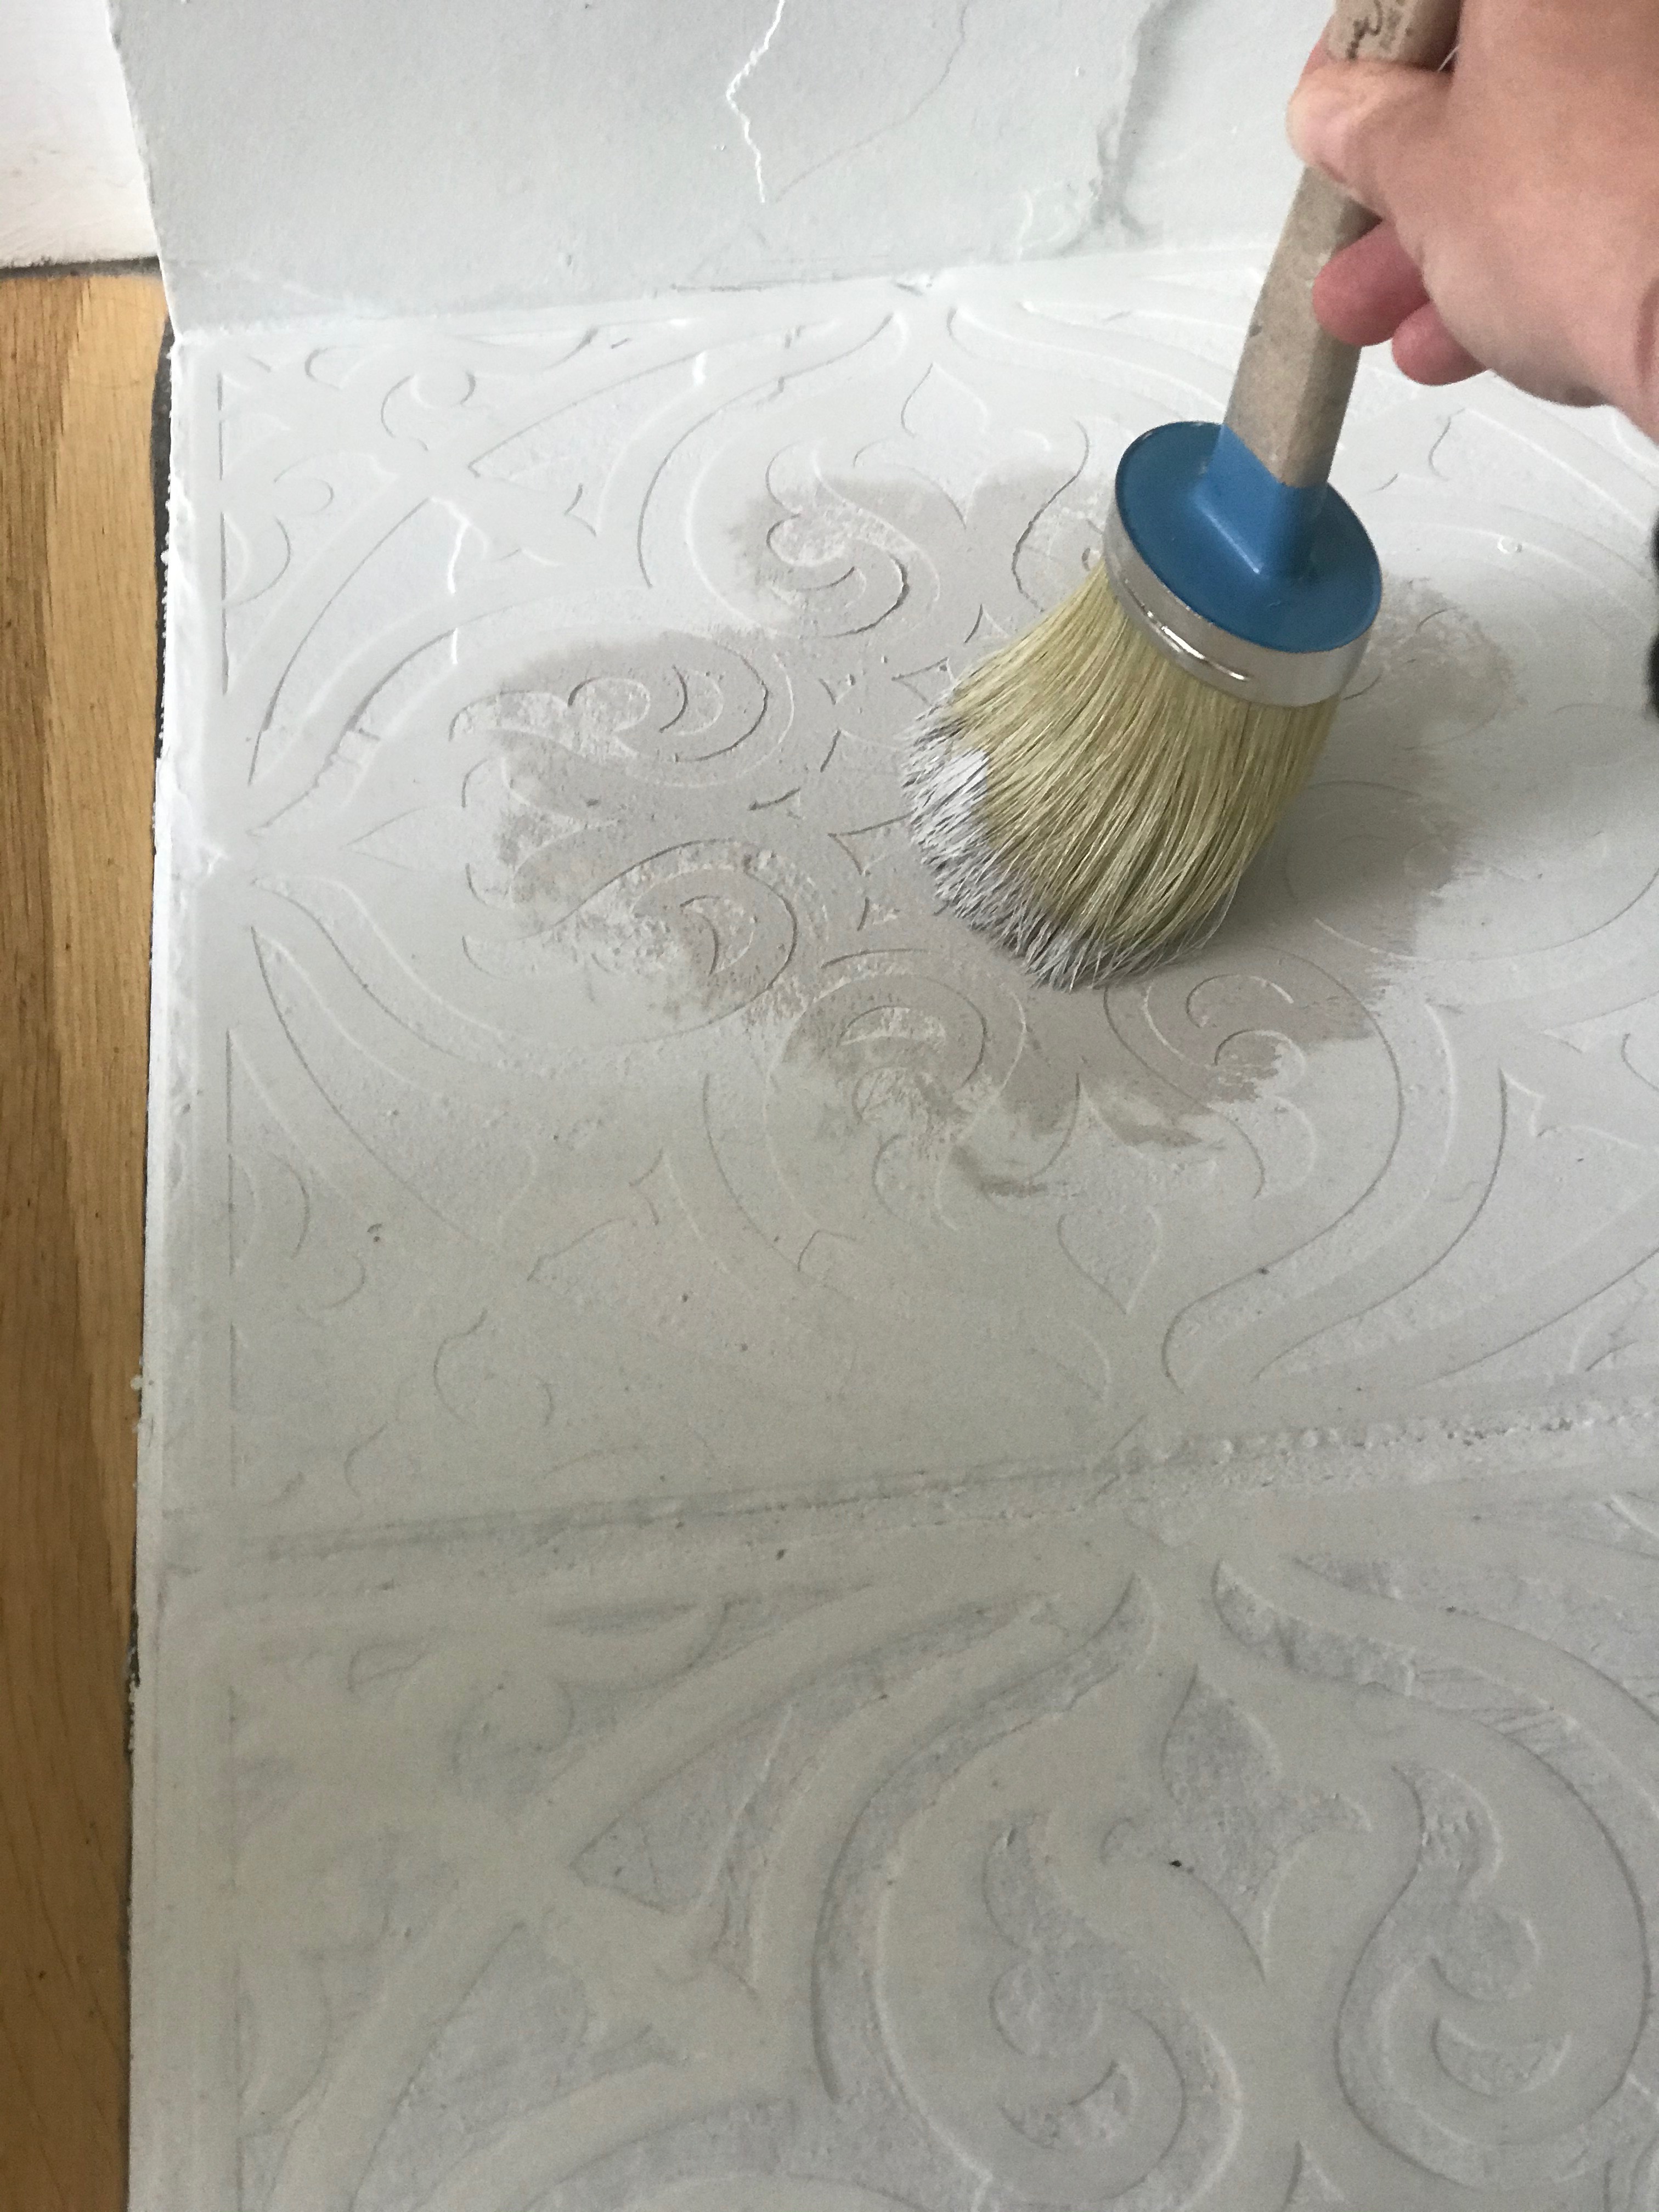 Painting over your stencil for a DIY fireplace mantel makeover